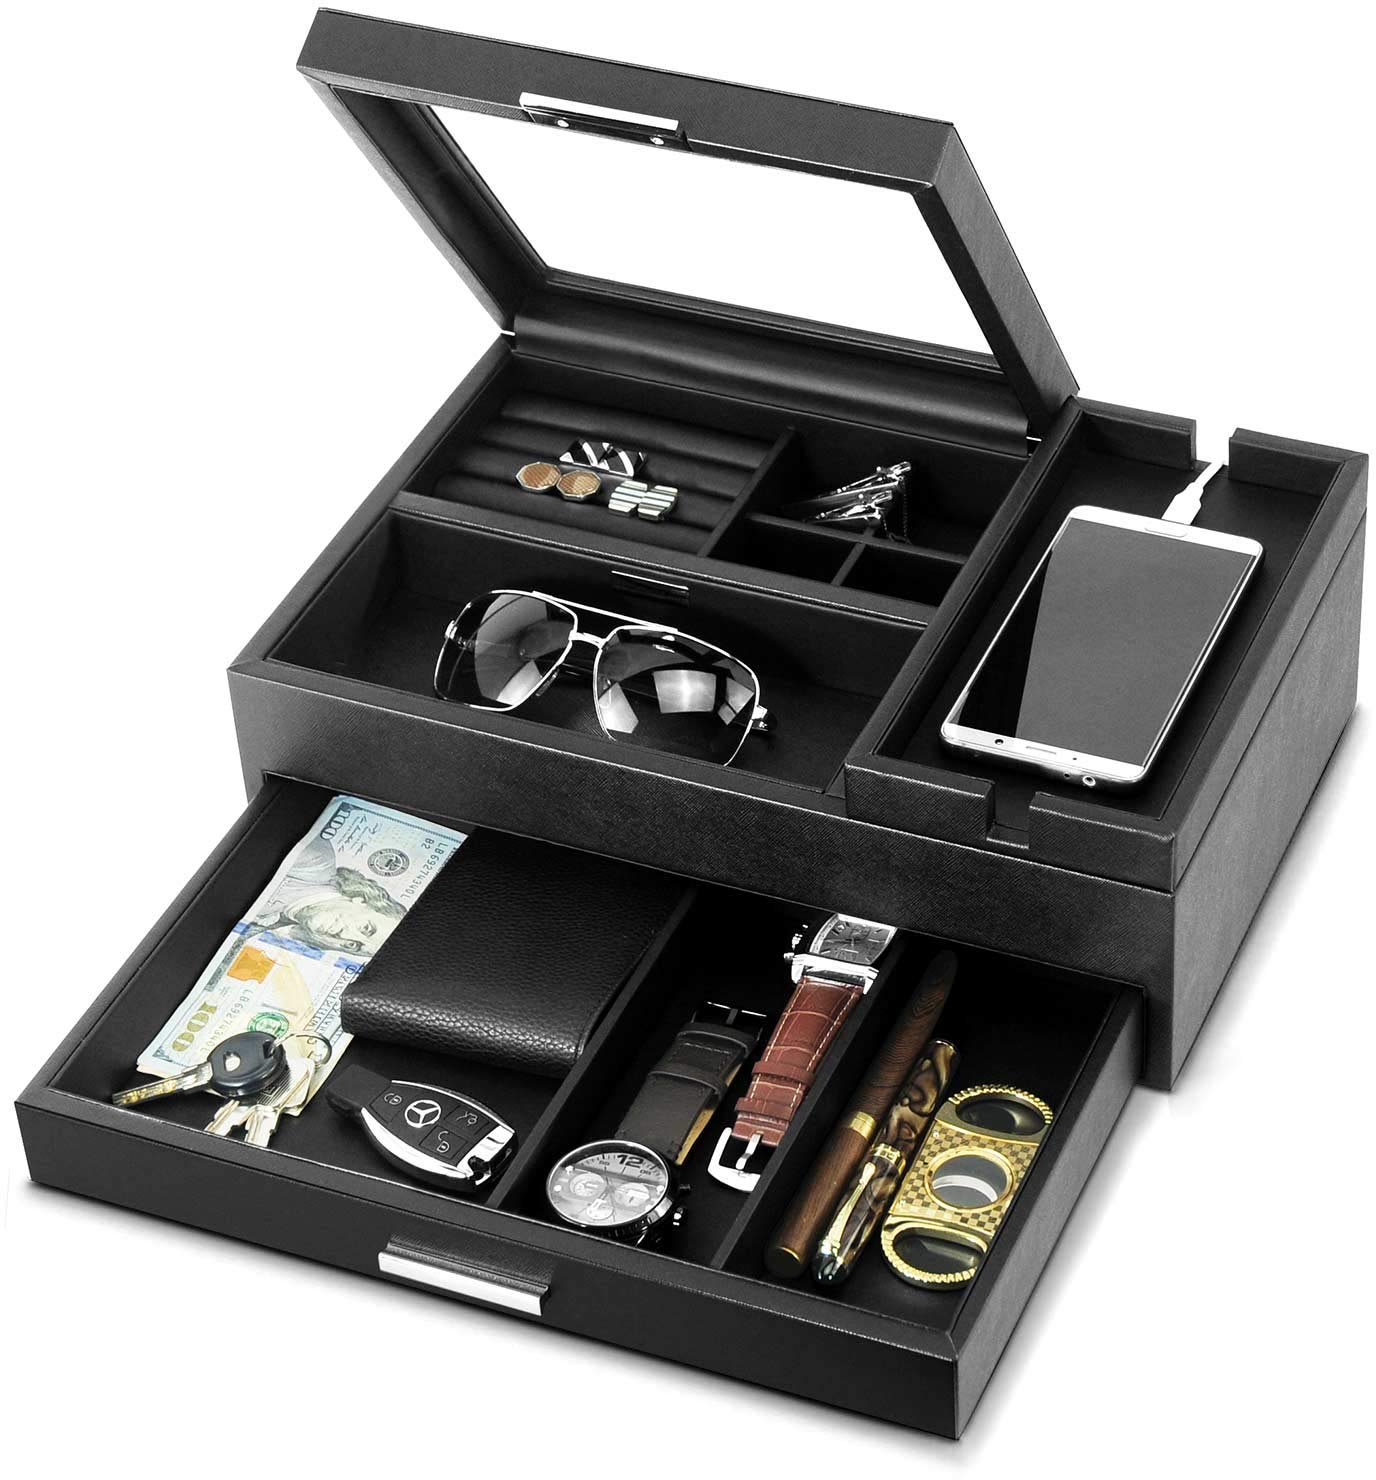 Lifomenz Co Mens Jewelry Box Valet Tray With Drawer And Charging